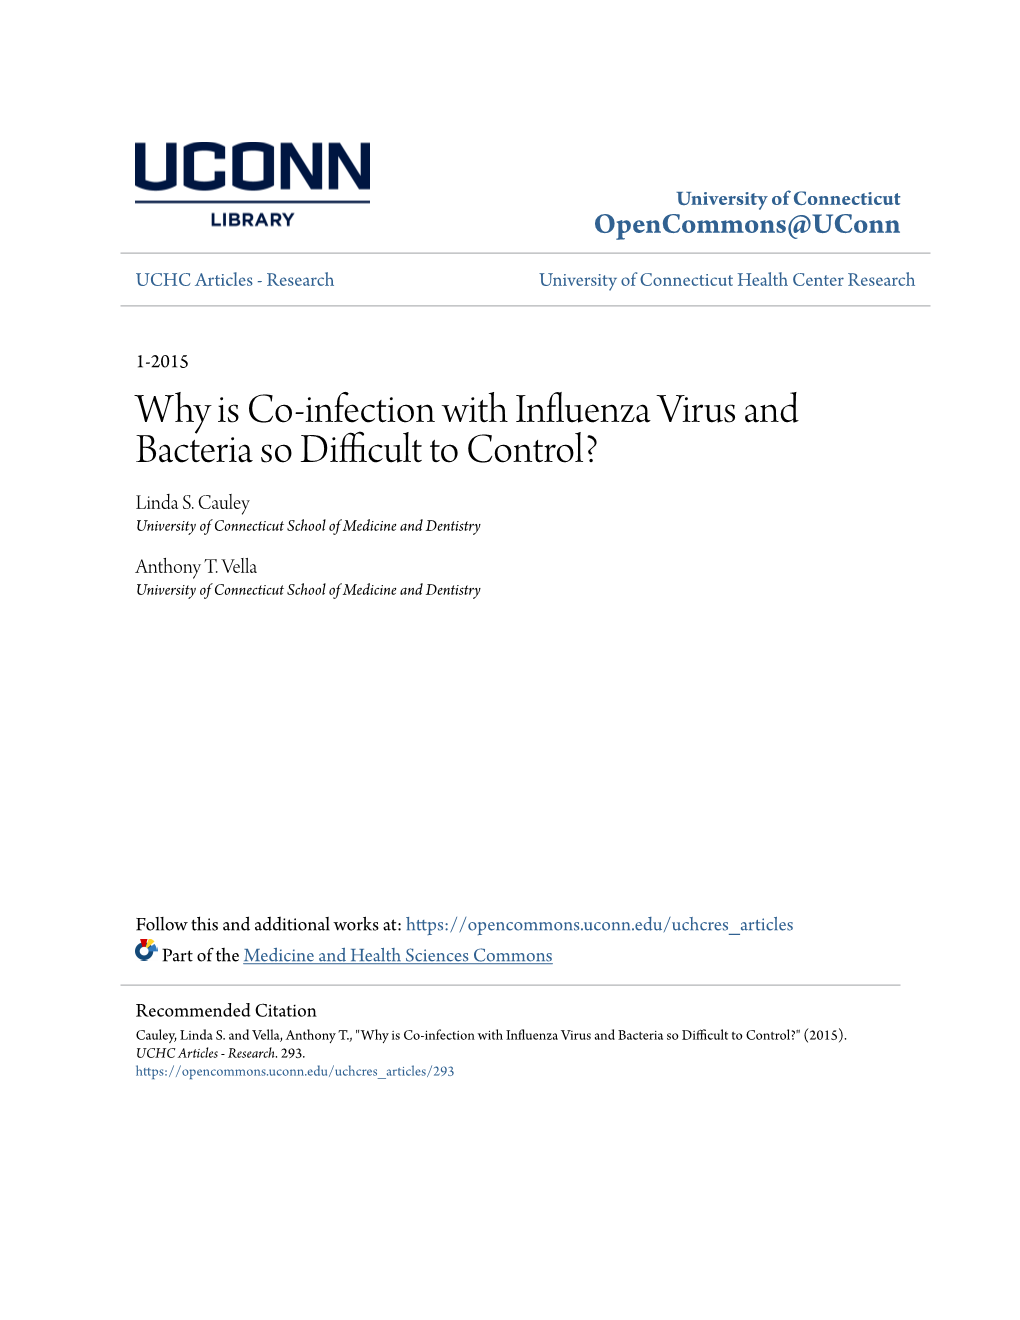 Why Is Co-Infection with Influenza Virus and Bacteria So Difficult to Control? Linda S